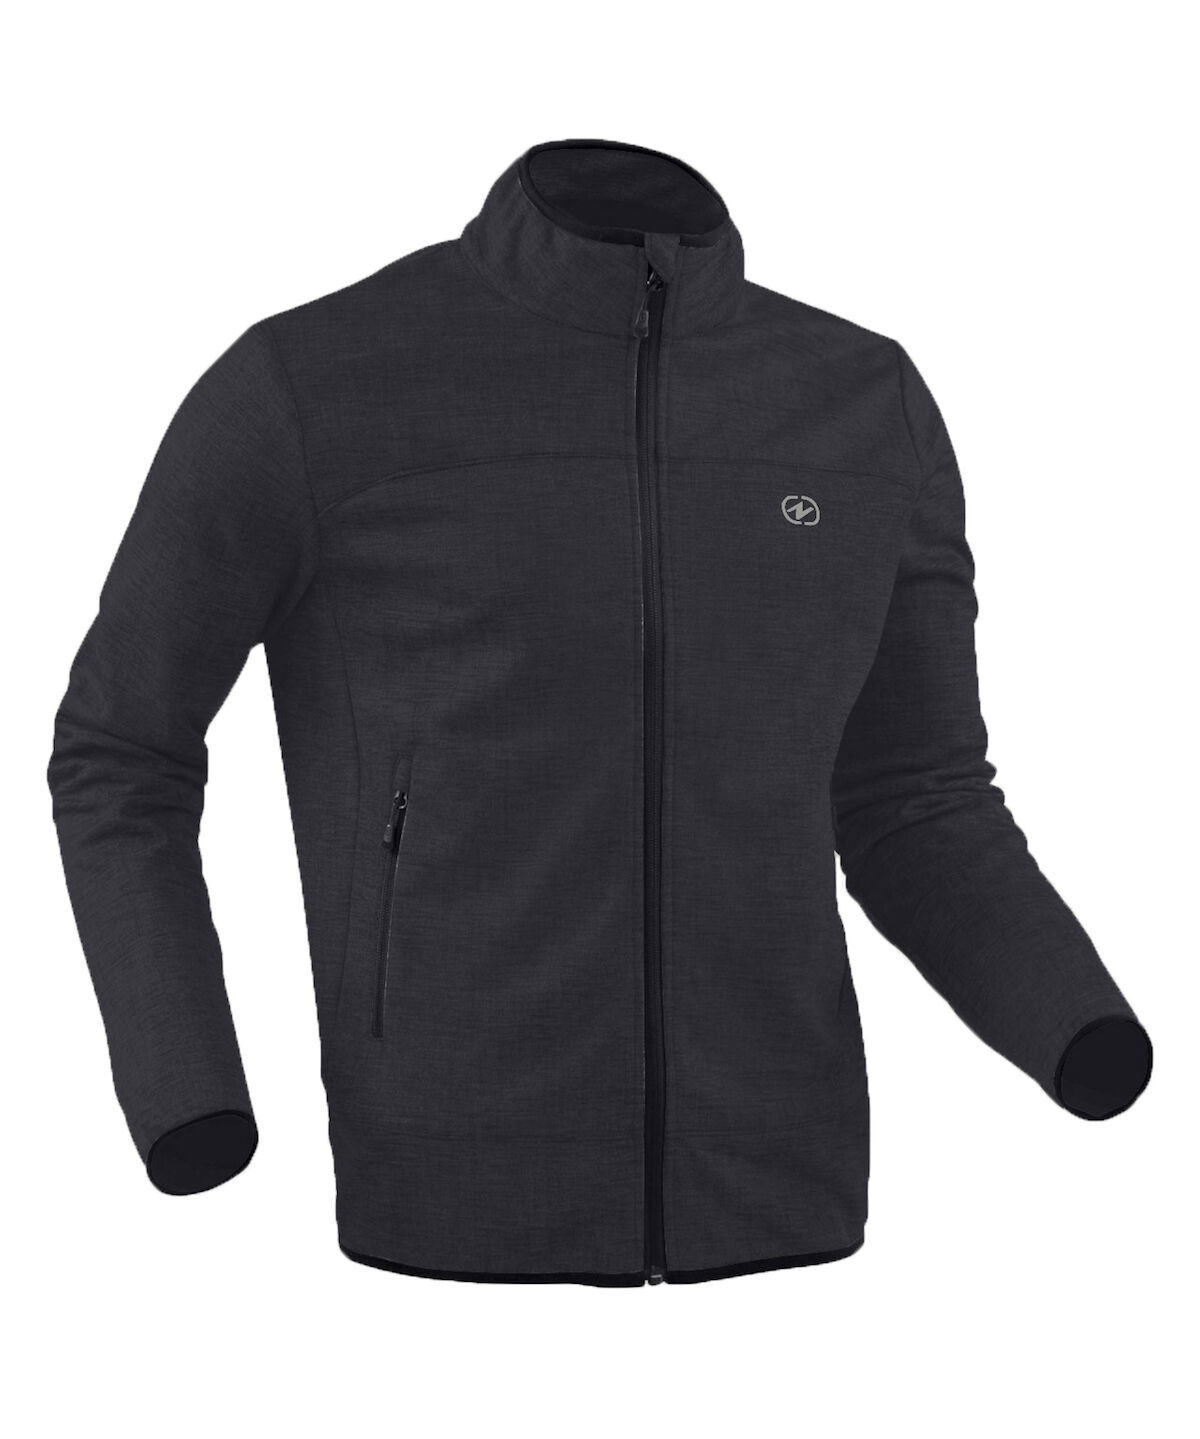 Damart Sport - Waterproof and breathable Softshell jacket - Giacca softshell - Uomo